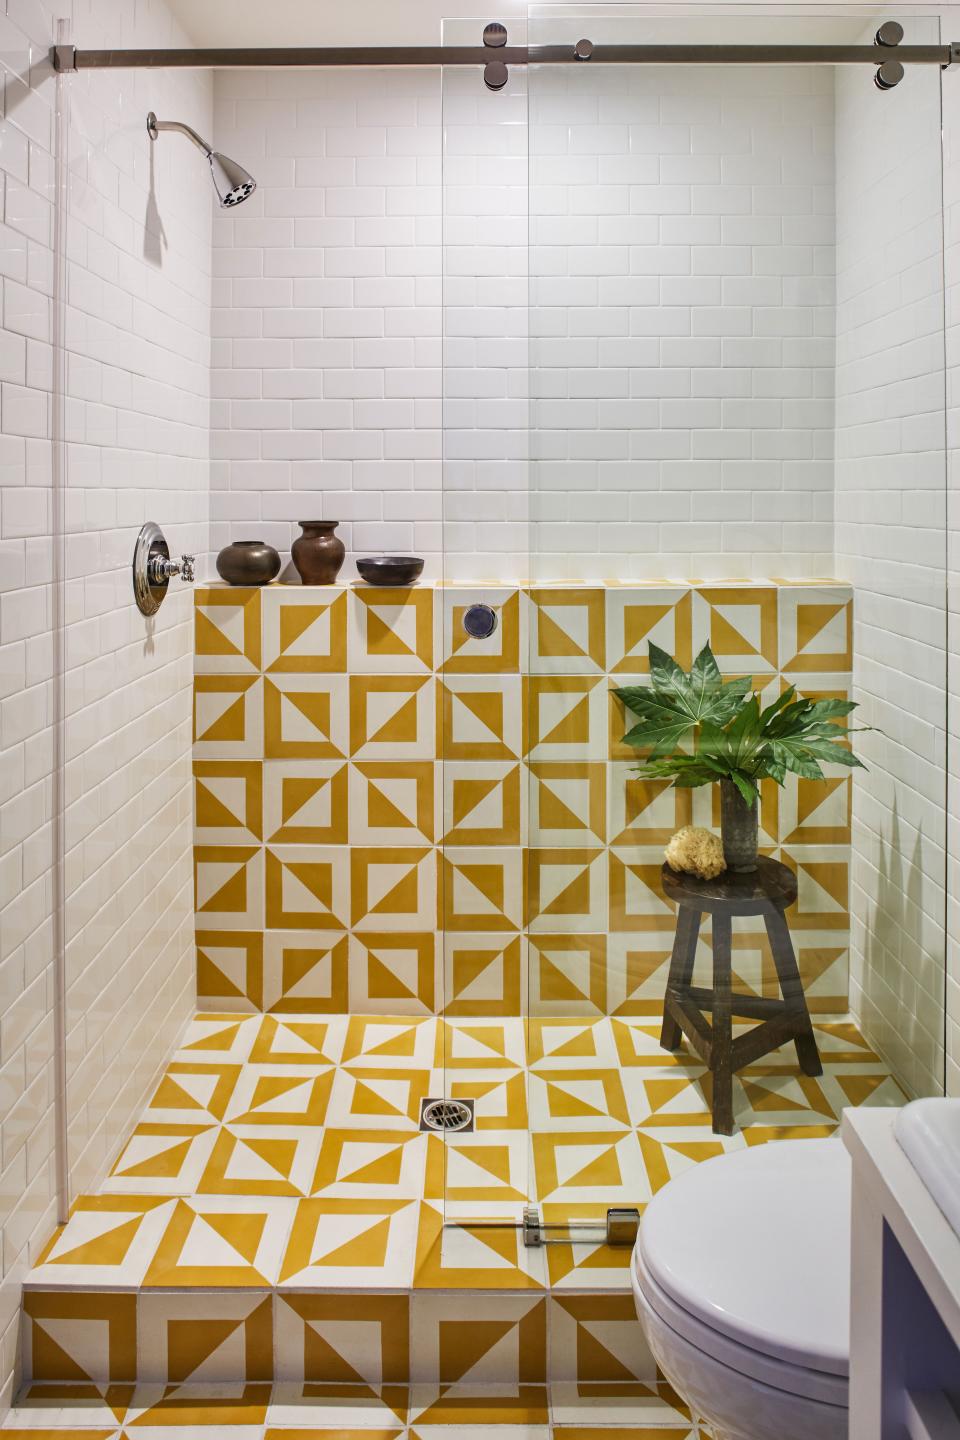 “My favorite color is yellow because it exudes so much joy,” Tony says of the Granada tiles in the guest house bathroom. Does he ever go over there just to shower? “You know what? I do actually,” he says.